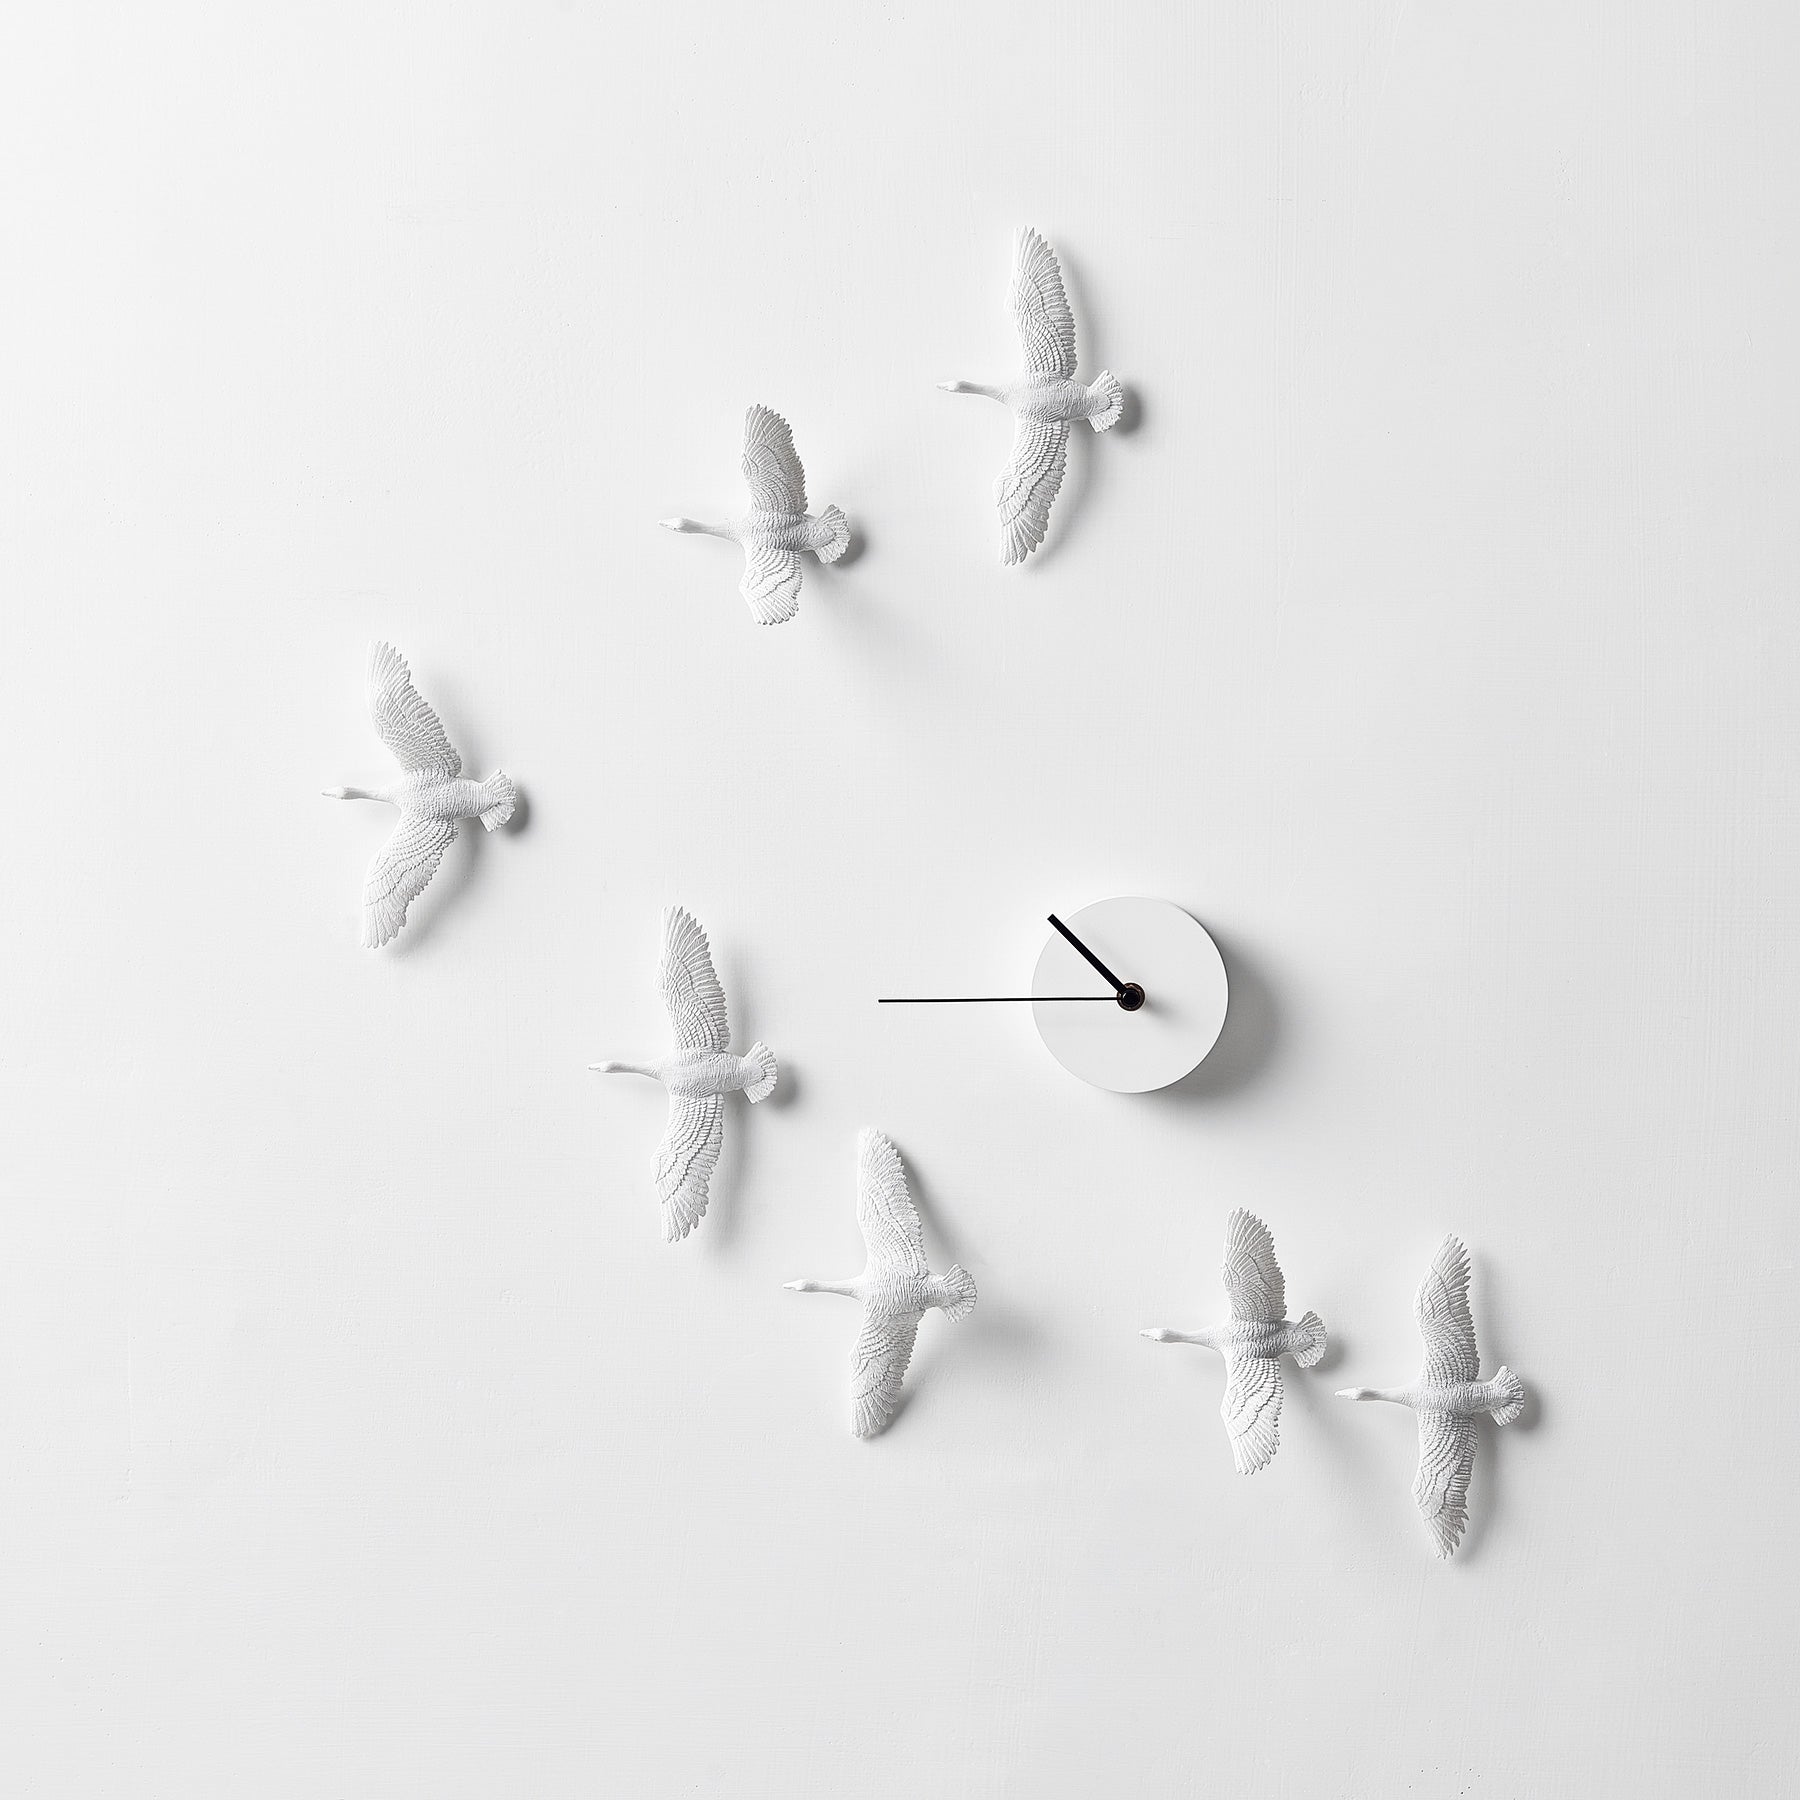 Bird Wall Clock It in the sky and home literally represent freedom